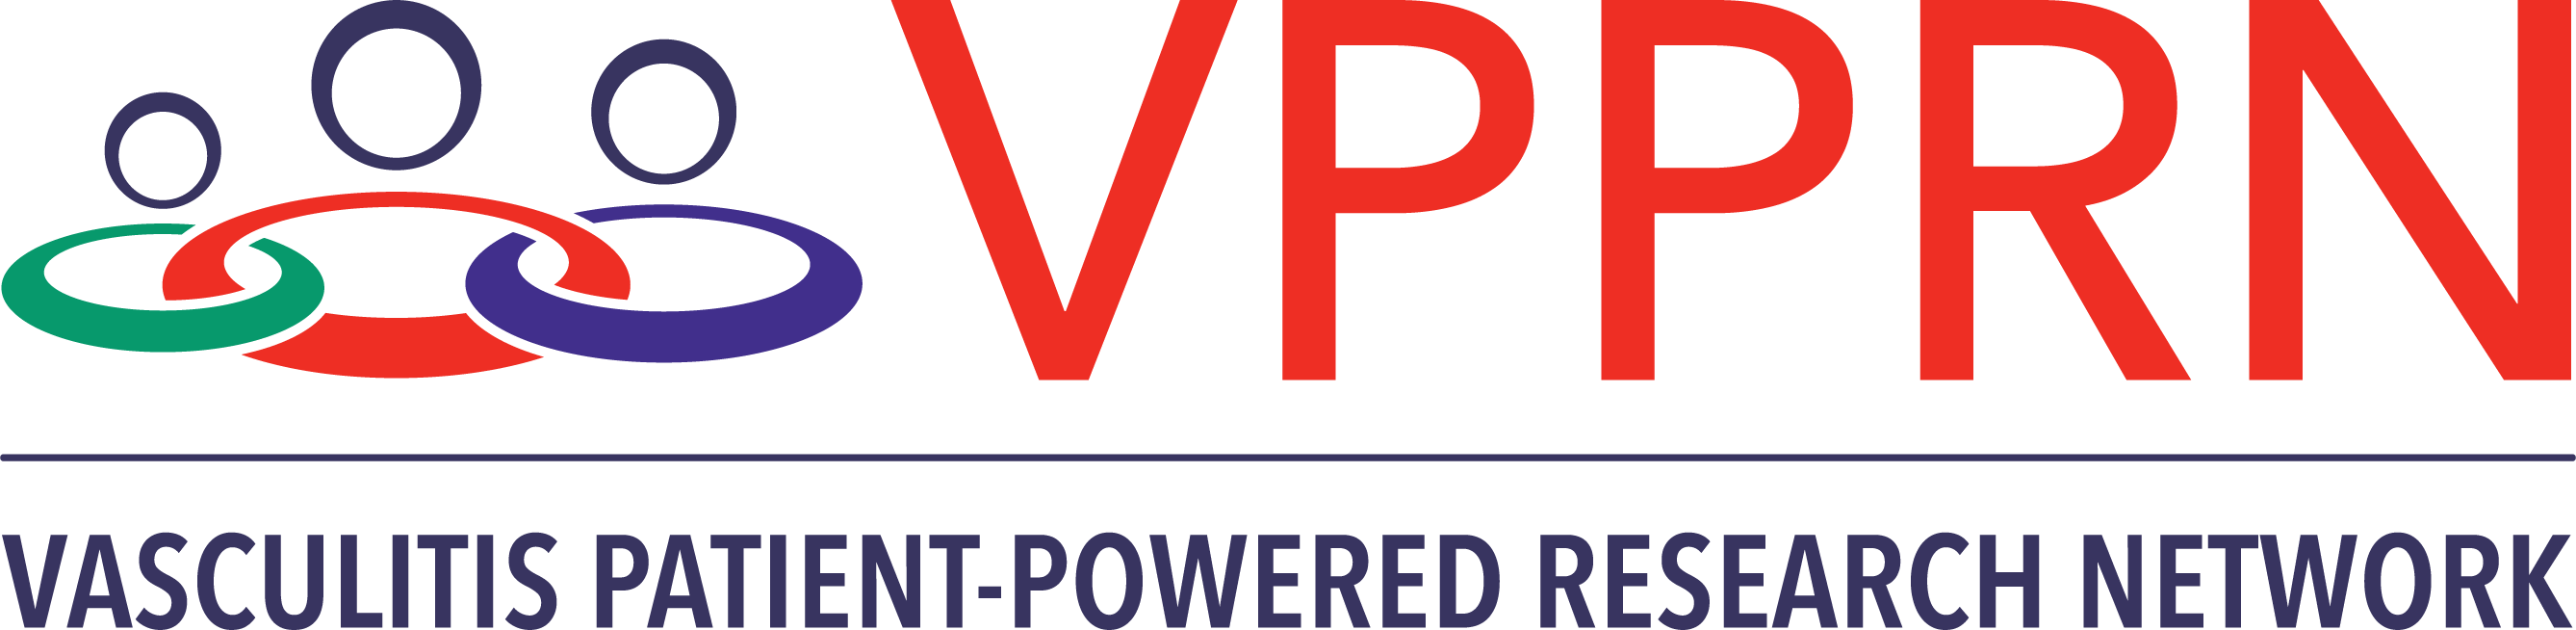 Vasculitis Patient-Powered Research Network logo